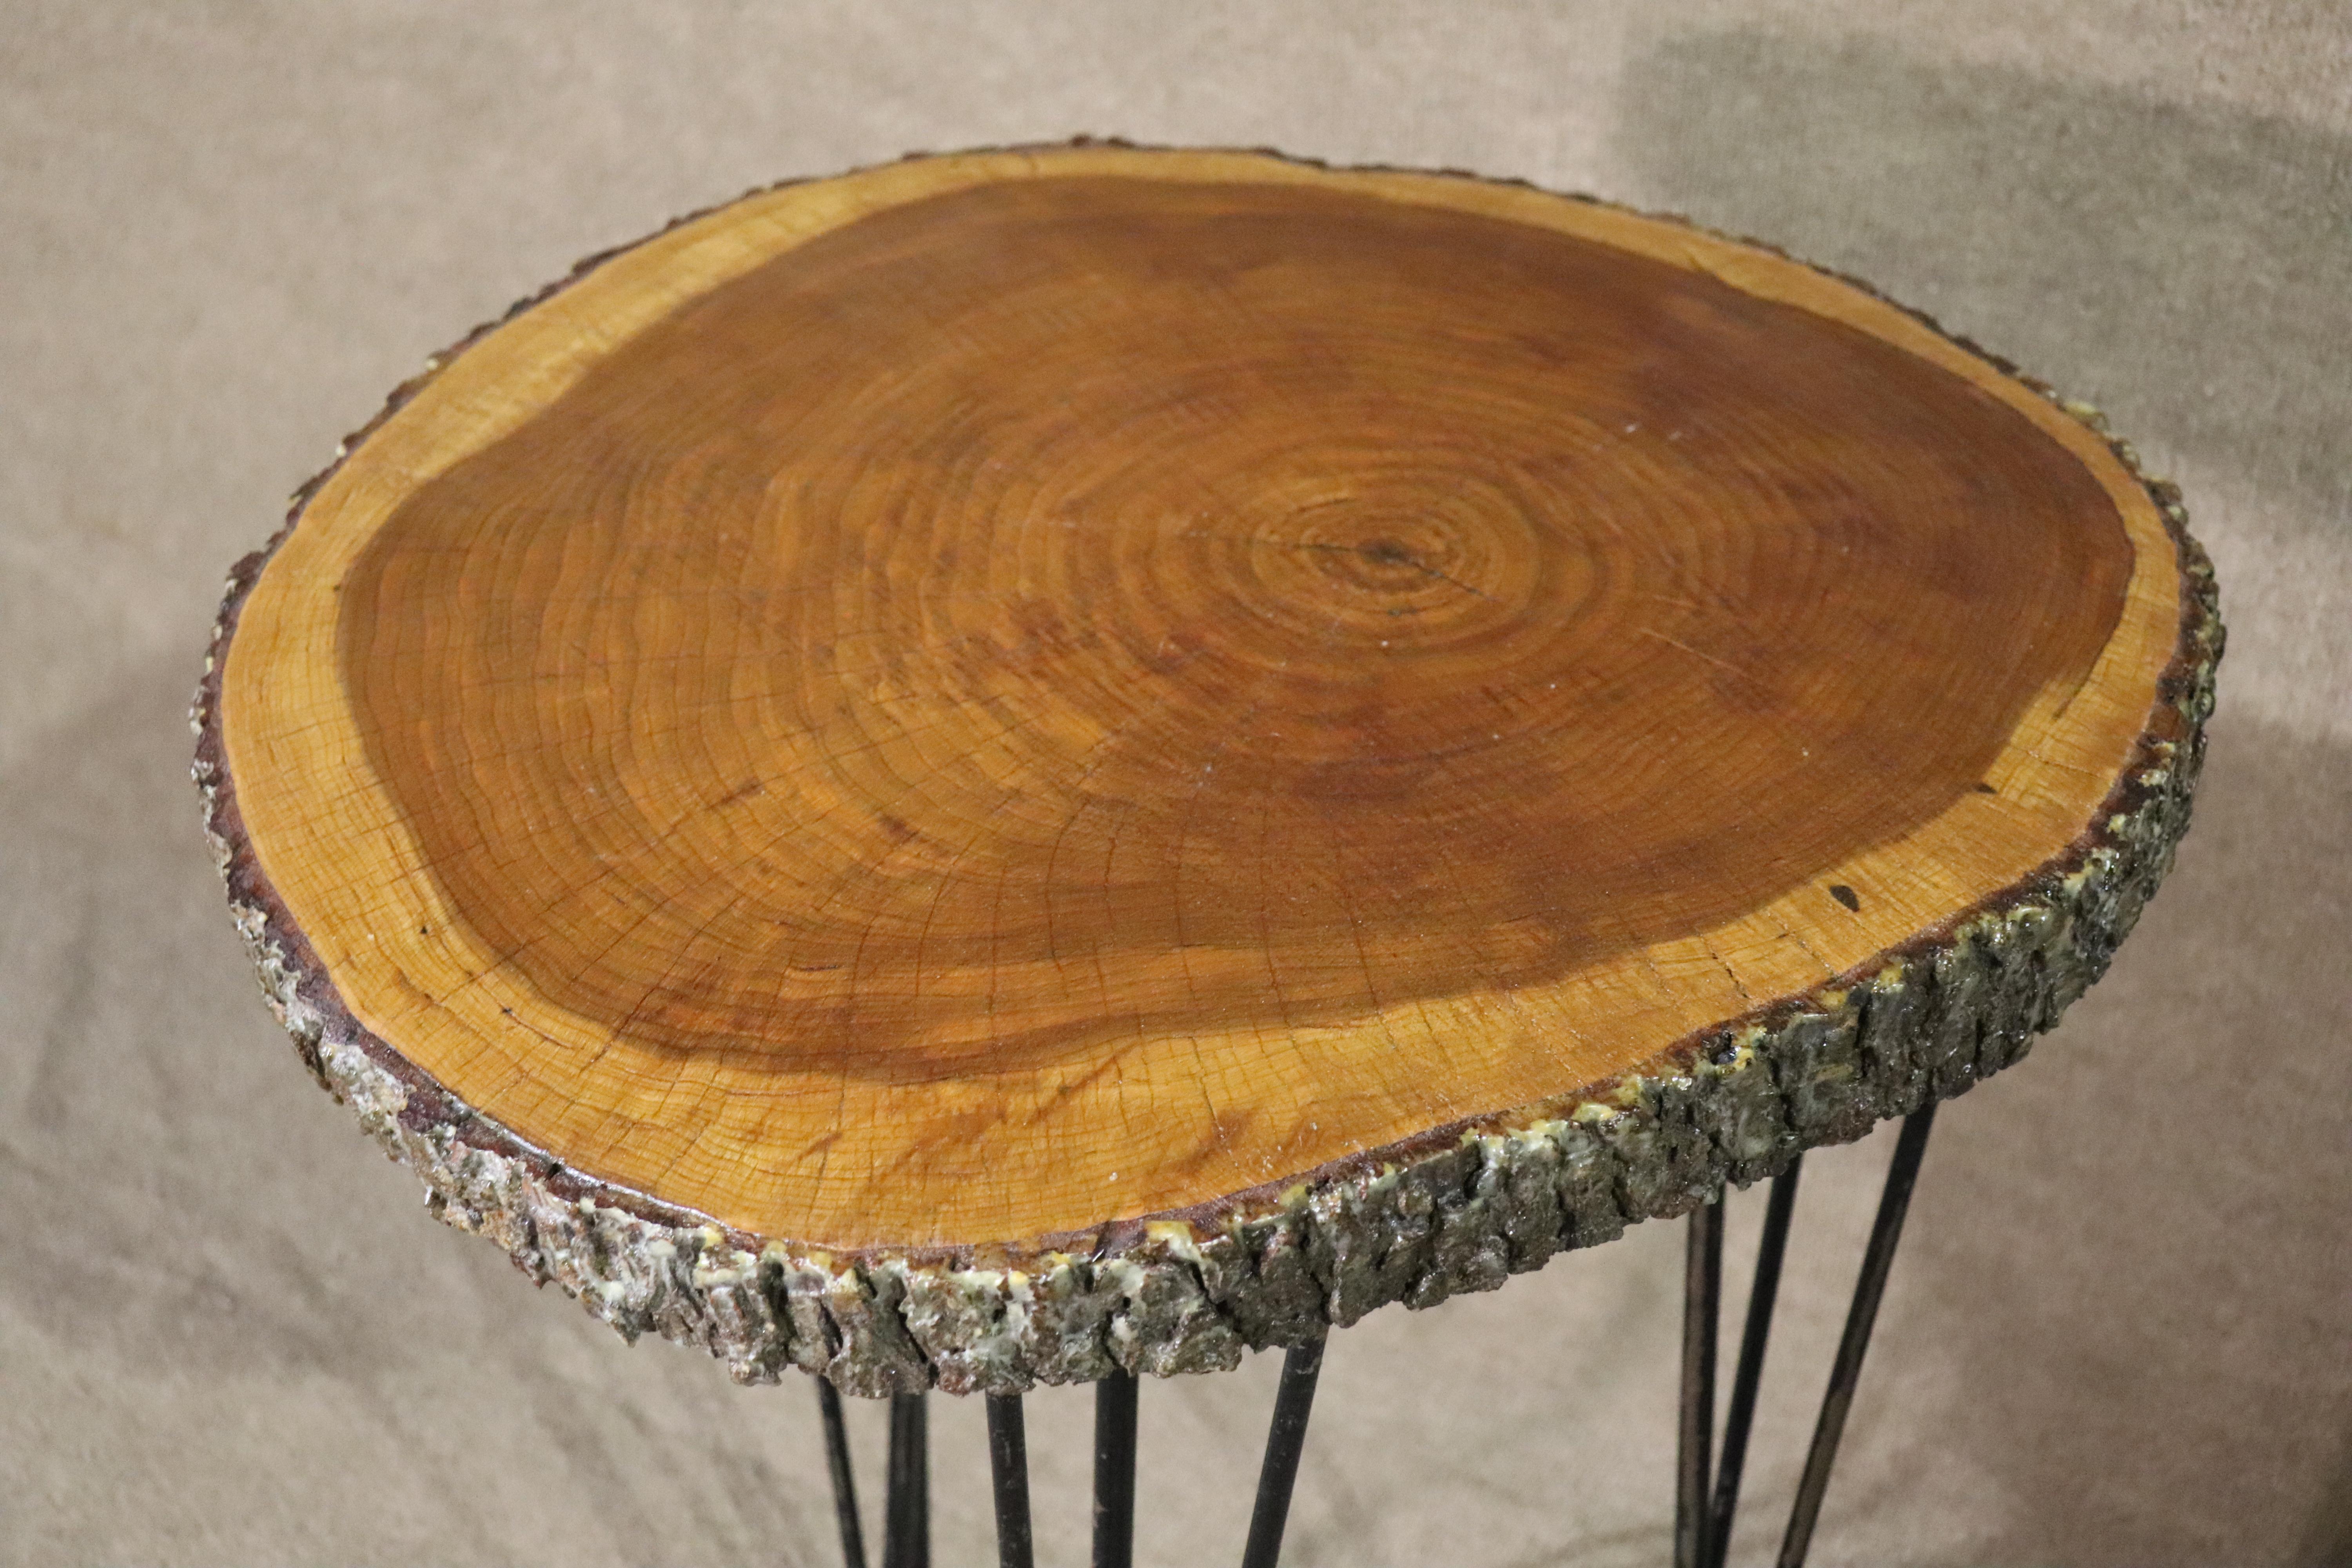 Studio made side table or pedestal with a wood slab on hairpin iron legs. Table top has an attractive rustic style with exposed live edge.
Please confirm location NY or NJ